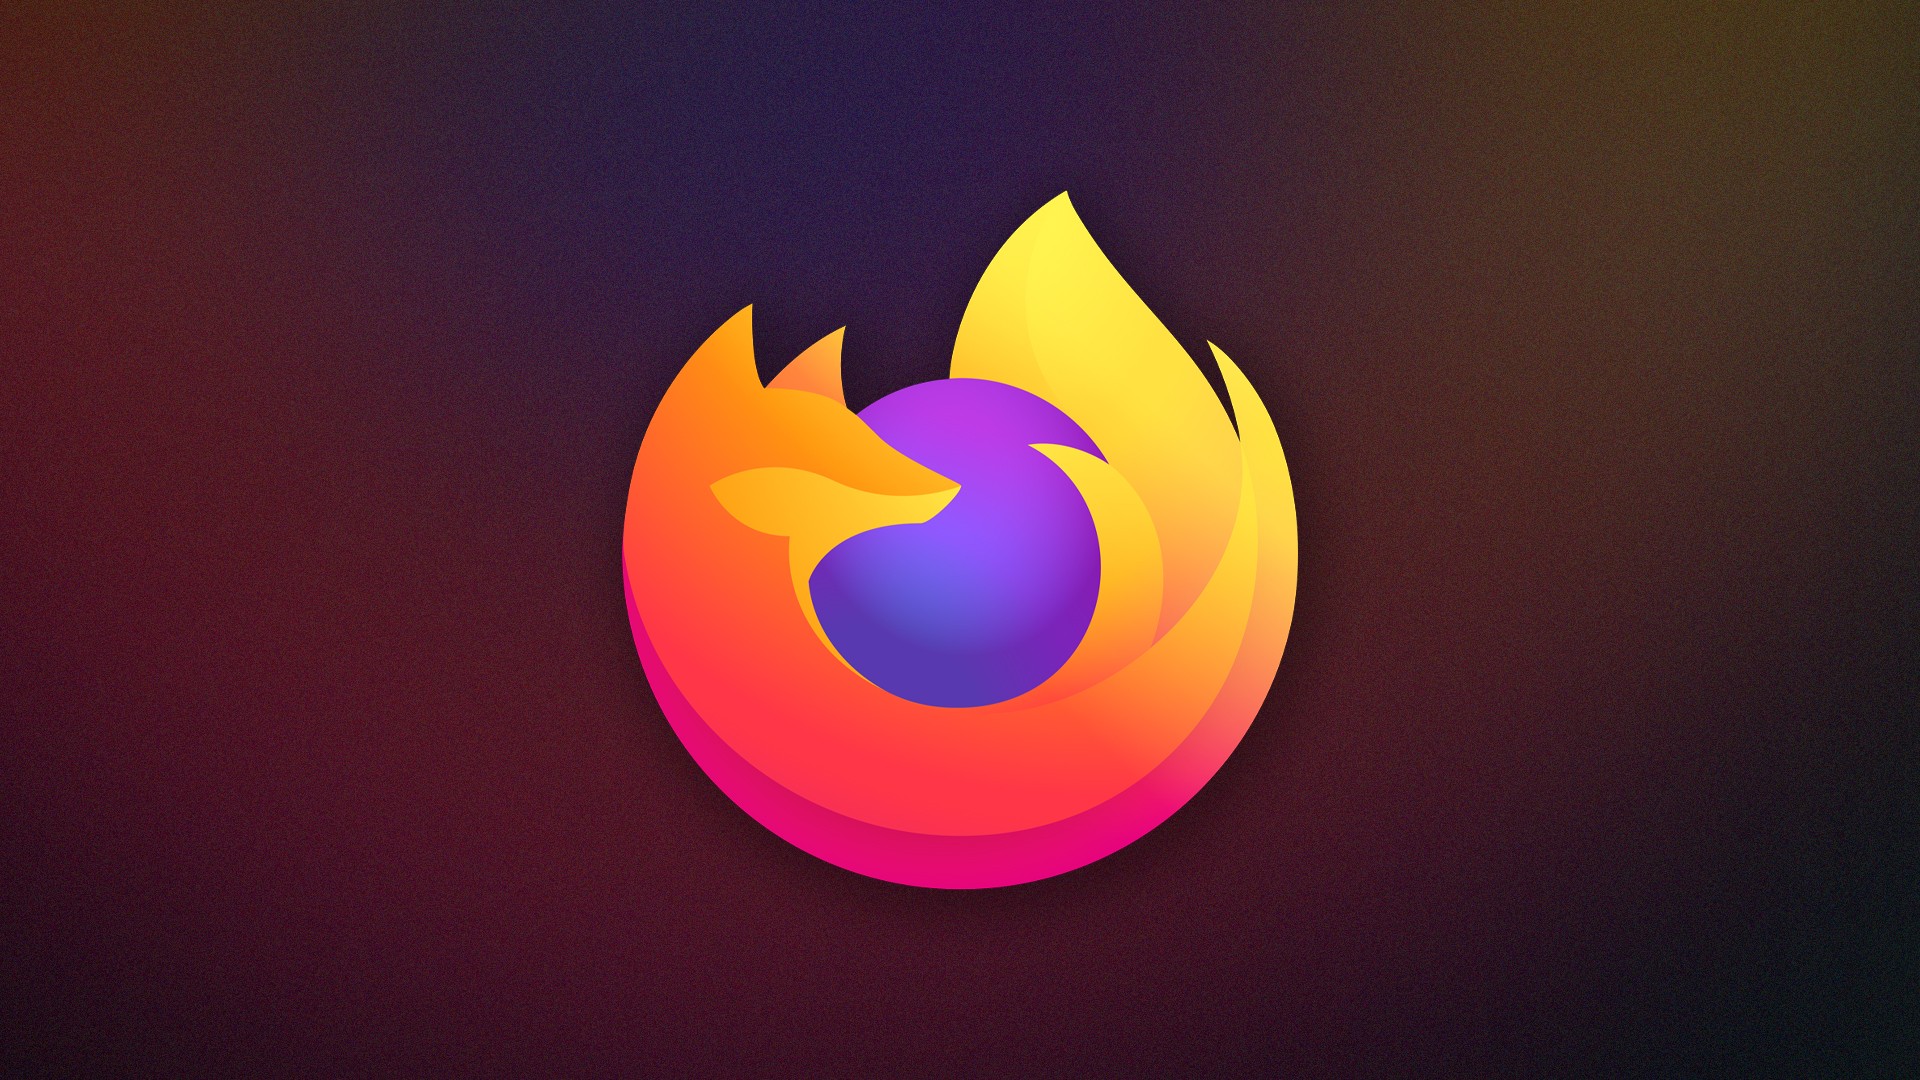 Mozilla releases Firefox version 107 with performance improvements and fixes
